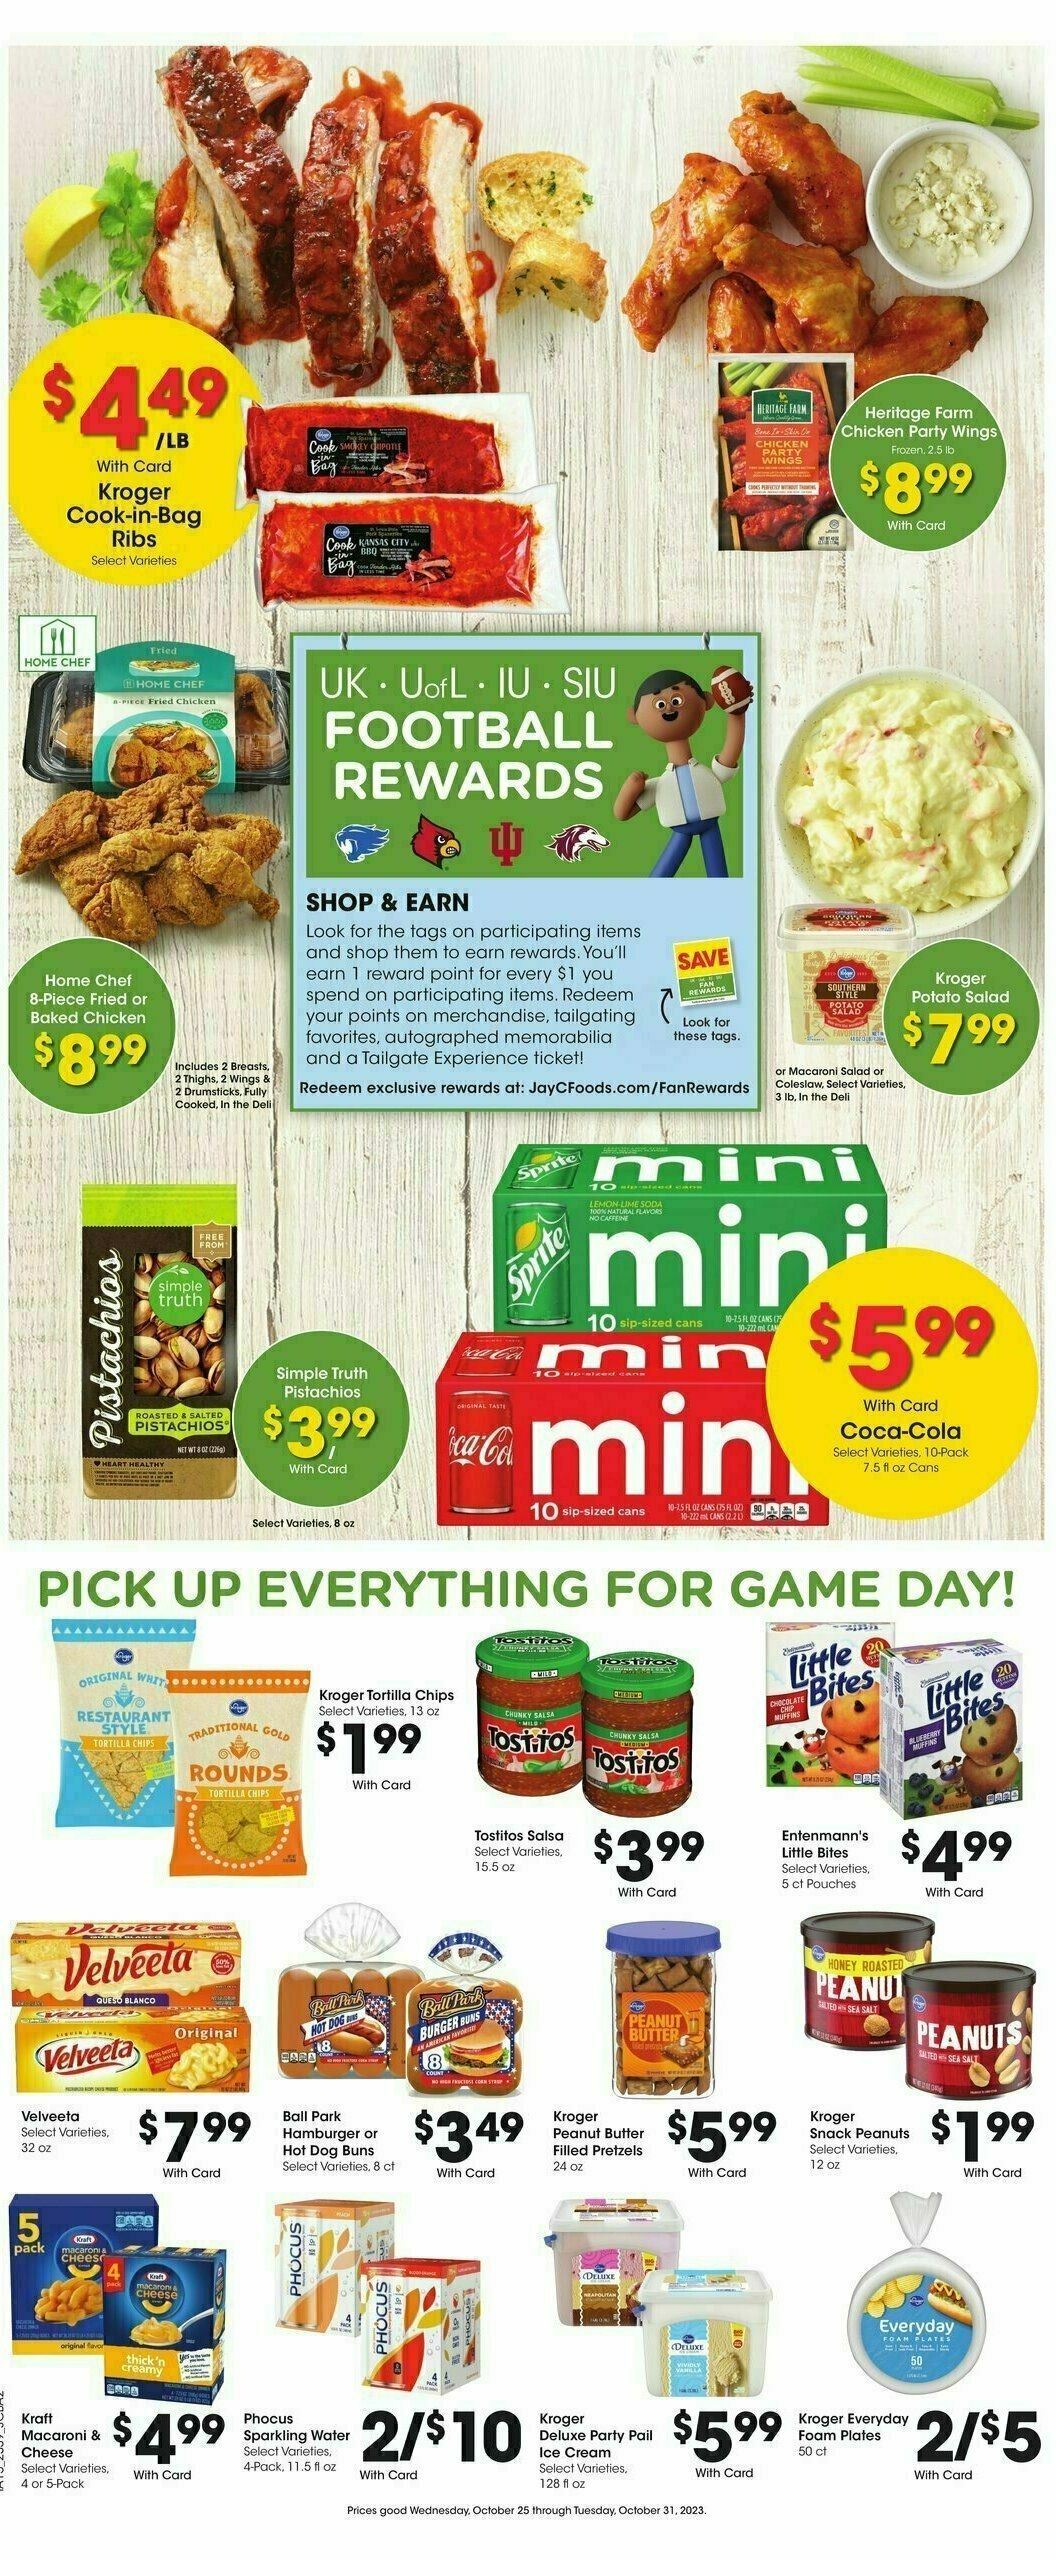 Jay C Food Weekly Ad from October 25